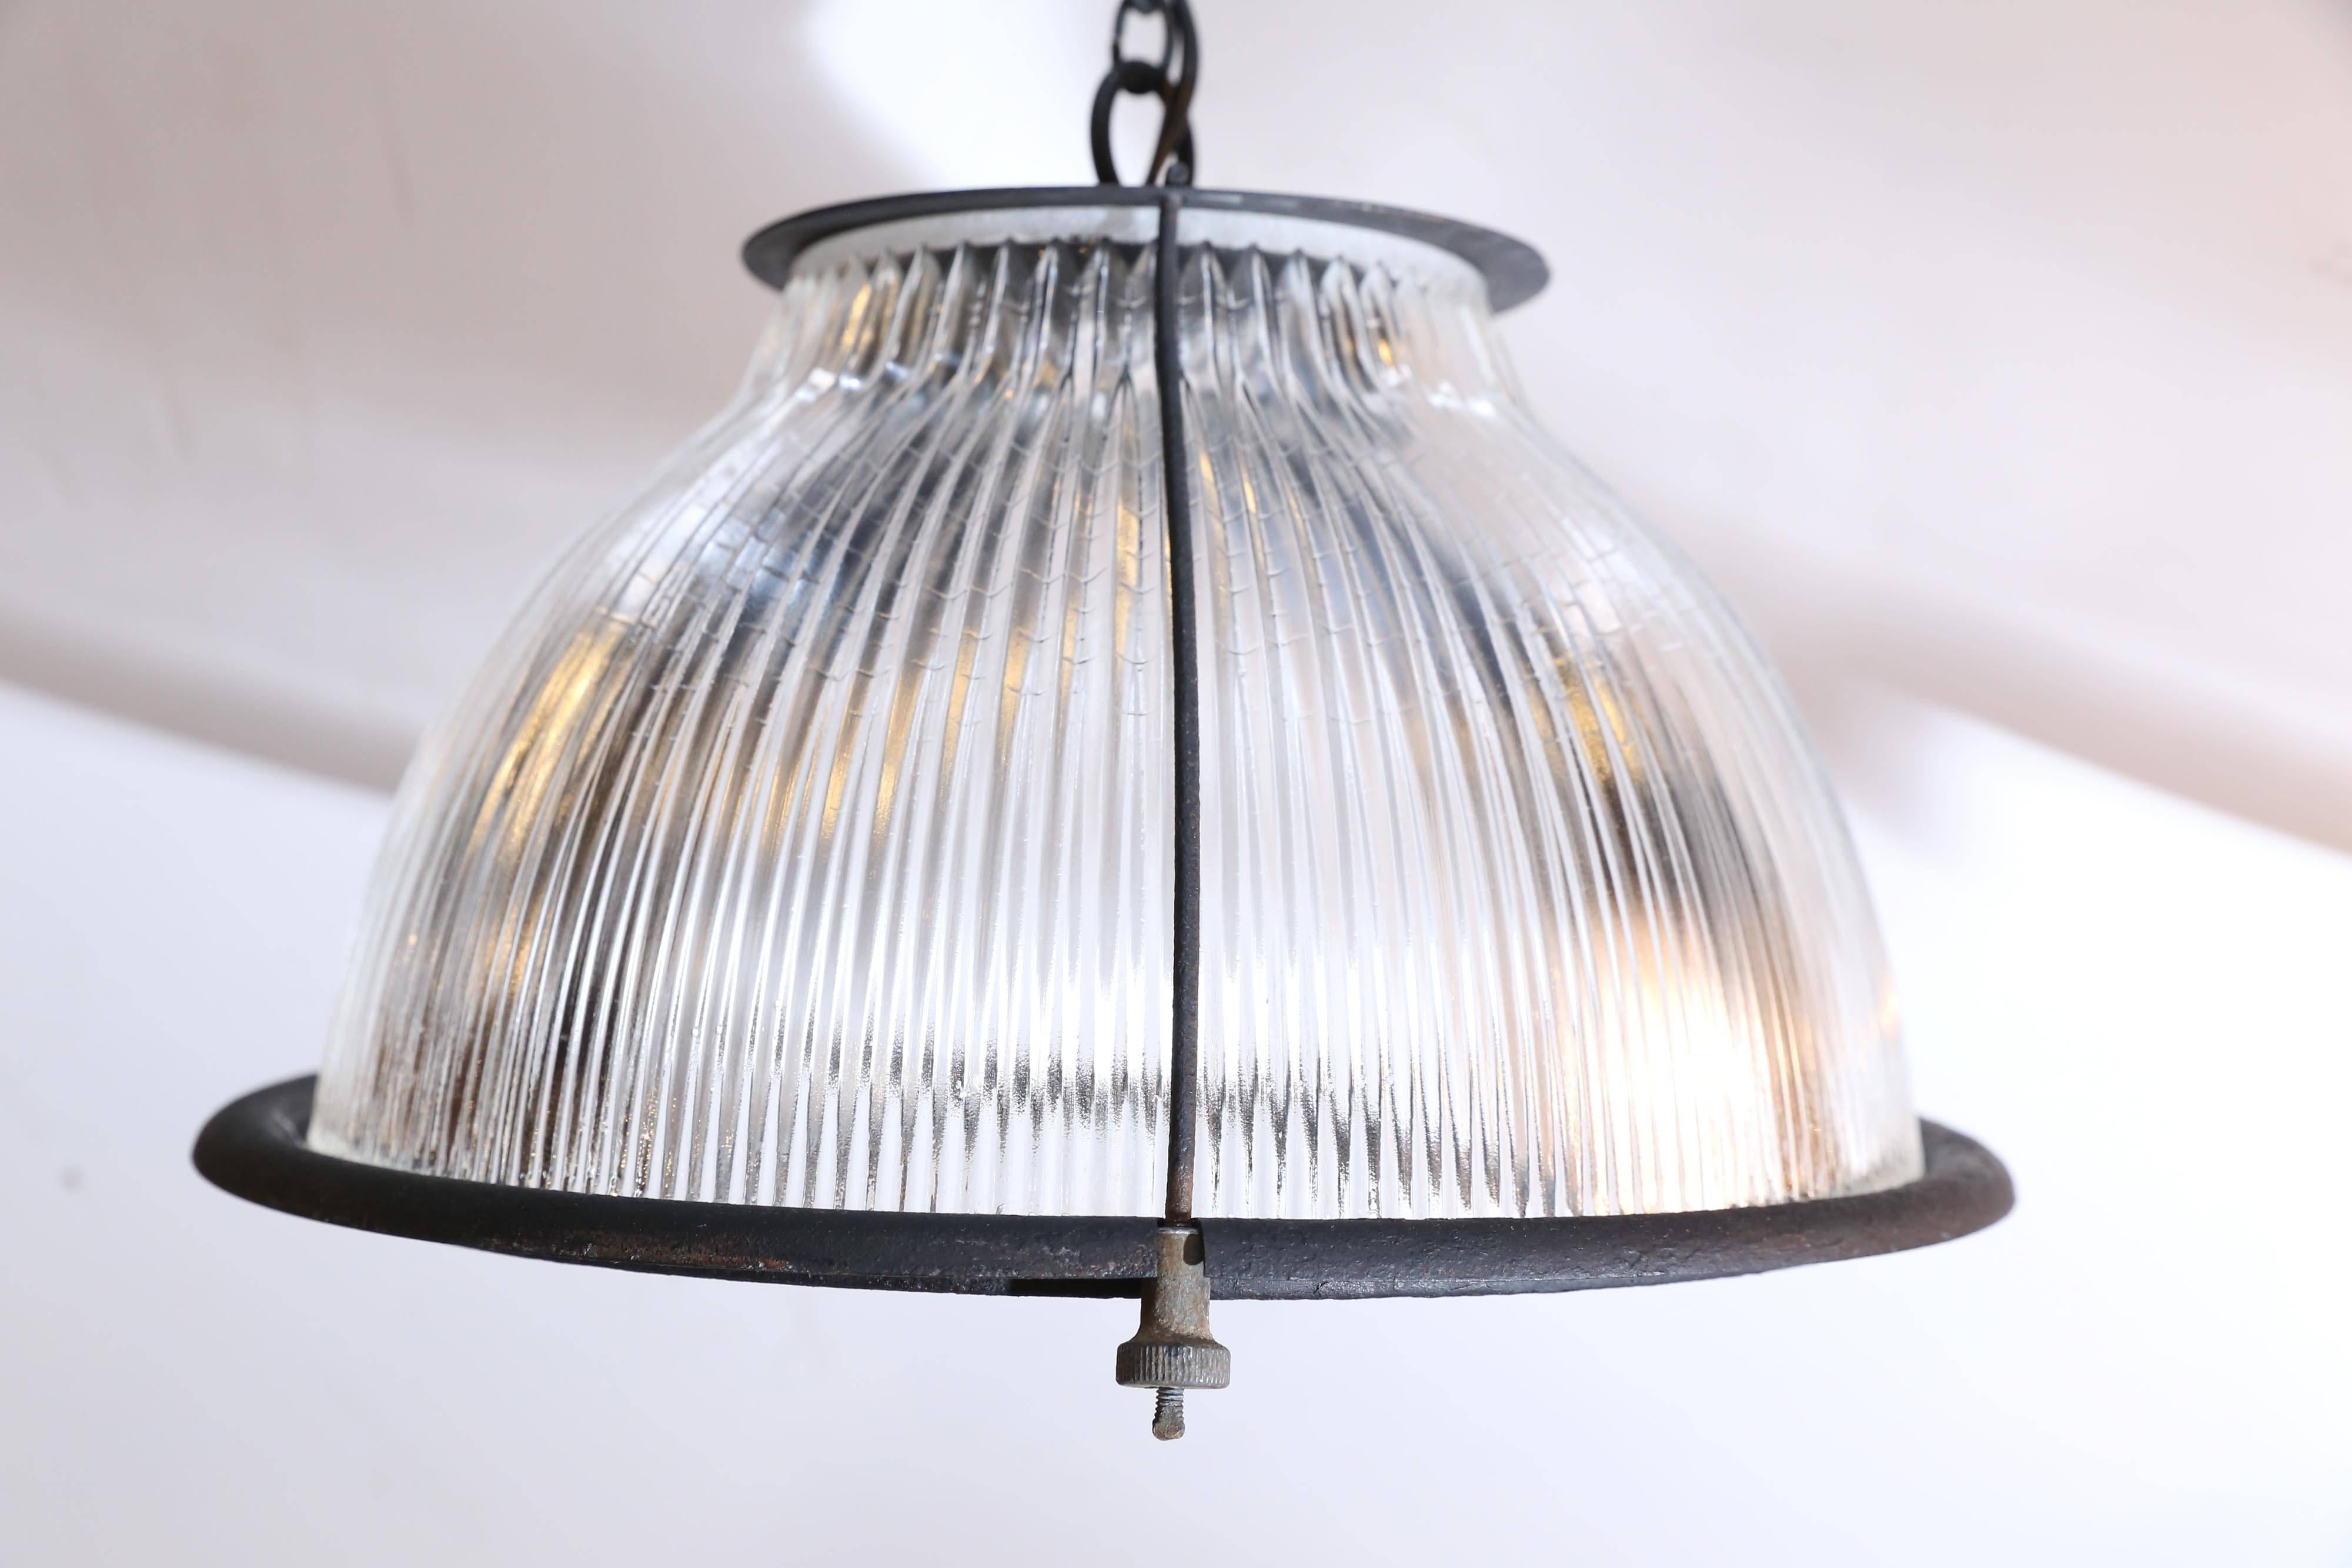 Industrial pendant light fixtures from France. With a timeless Industrial aesthetic, this vintage hanging light fixture has a metal frame supporting a ridged Holophane glass shade. The shade is suspended from a 55 inch pendant consisting of three